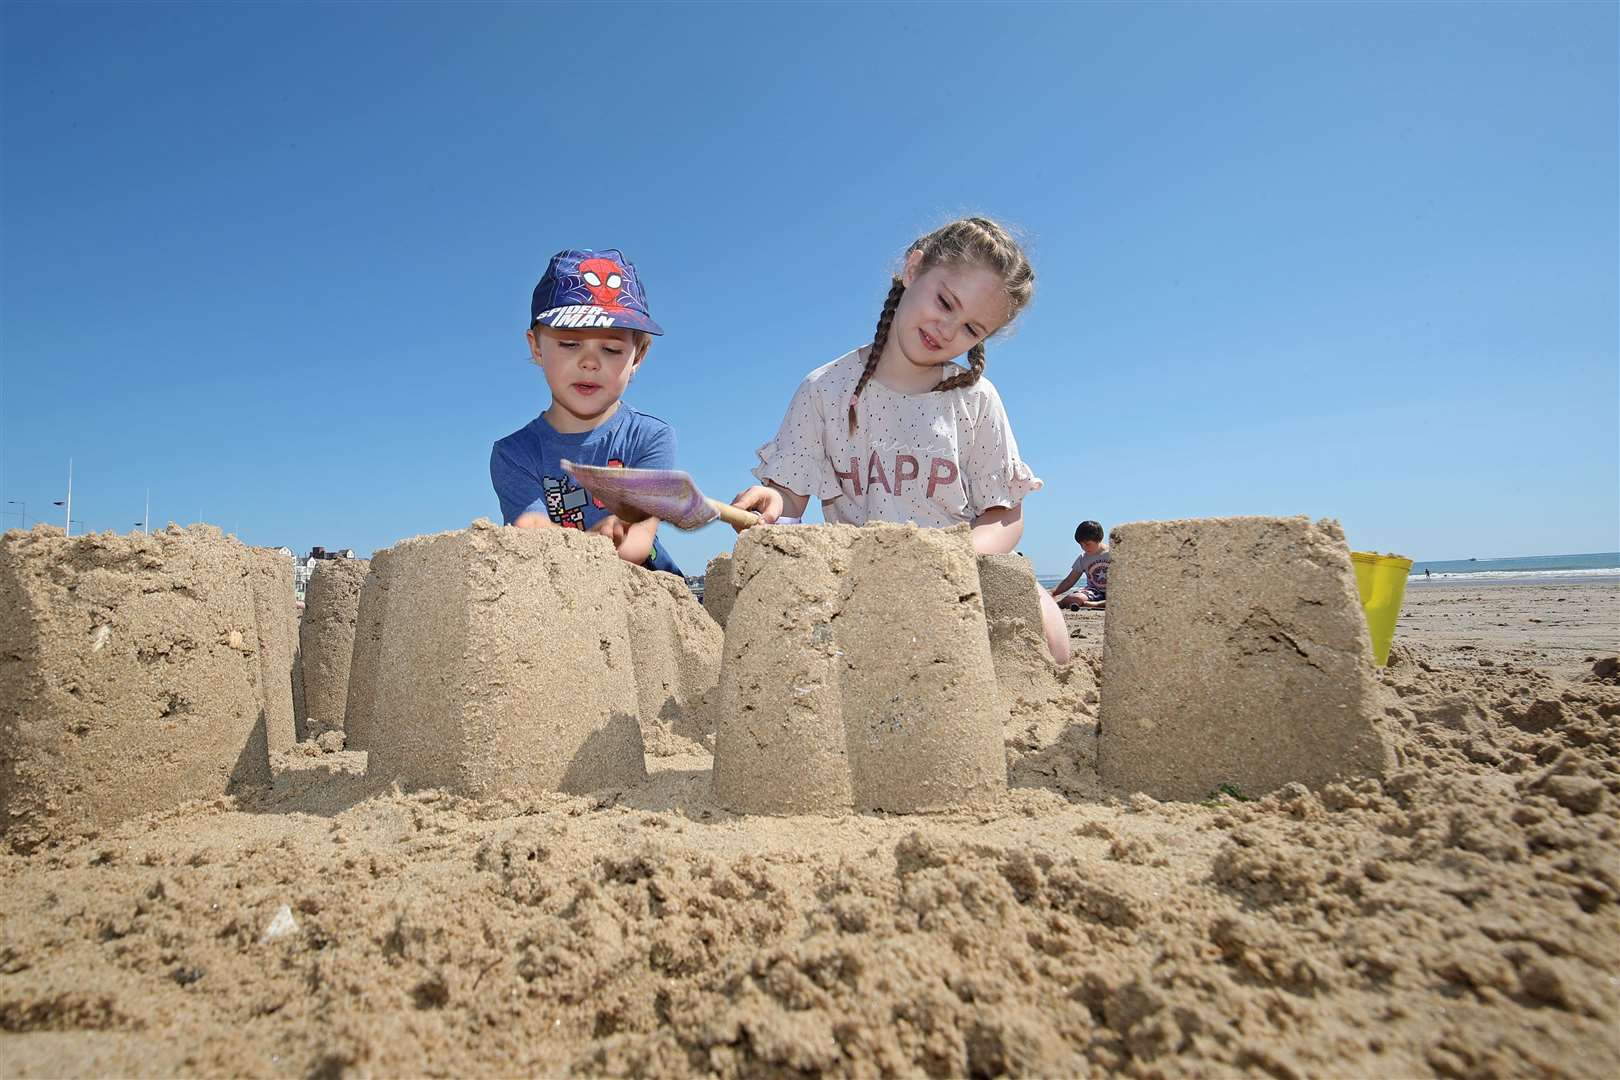 Zachary Bower, four, and Isabelle Bower, eight, enjoy making sandcastles on Bridlington beach in East Yorkshire (Danny Lawson/PA)